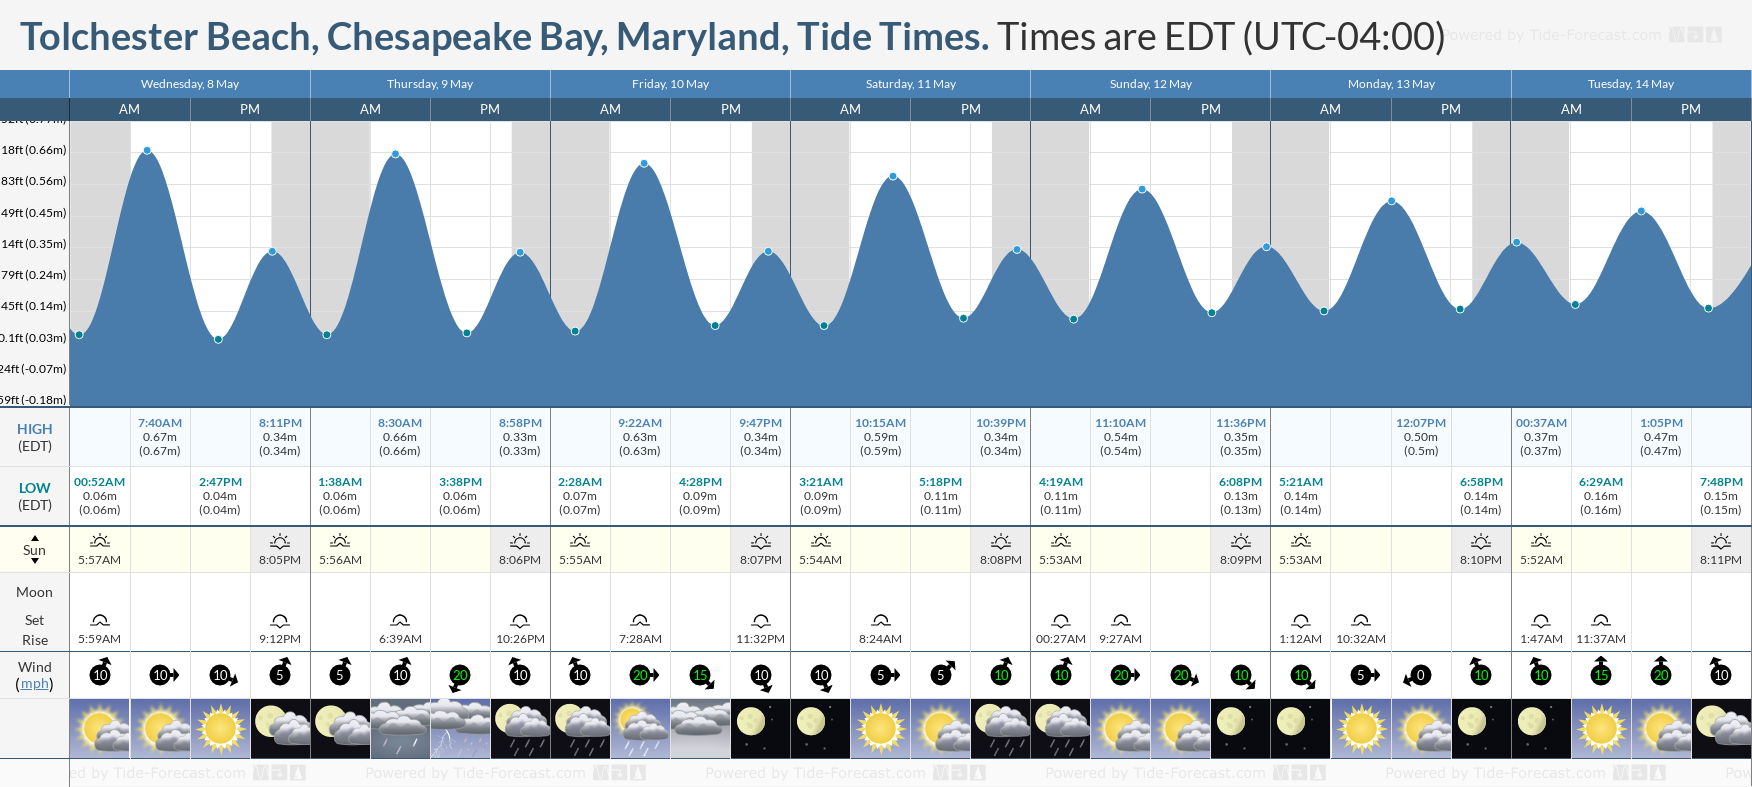 Tolchester Beach, Chesapeake Bay, Maryland Tide Chart including high and low tide tide times for the next 7 days